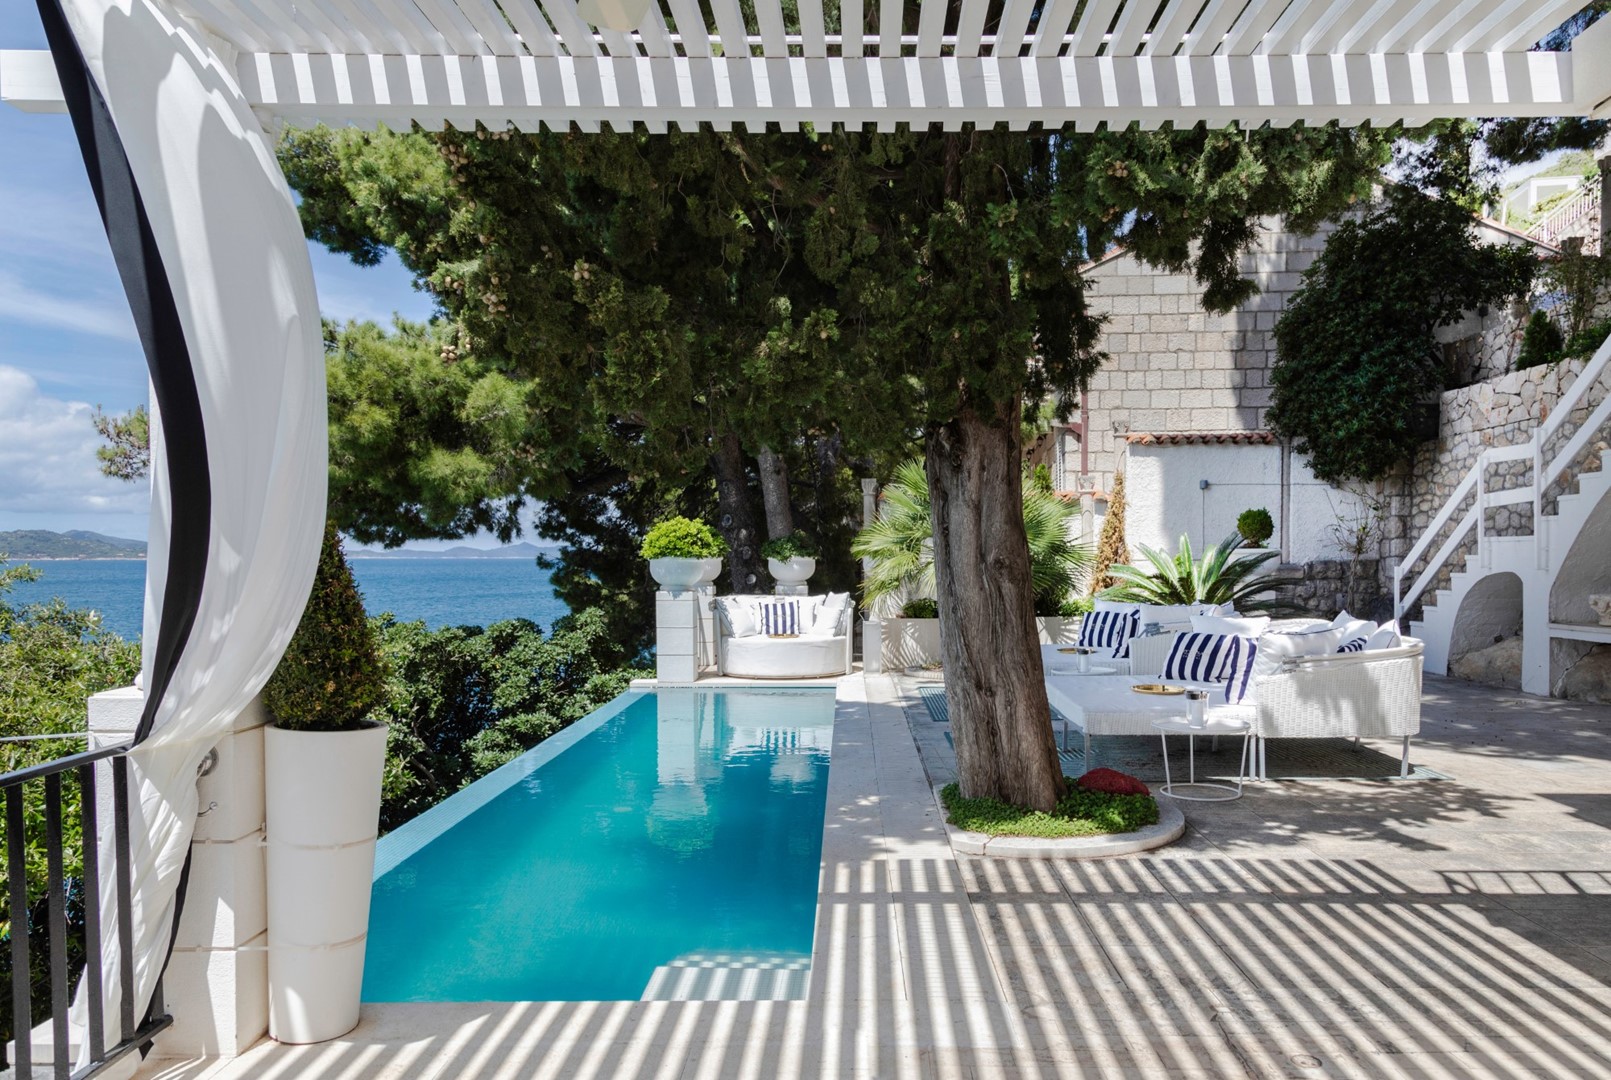 Terrace of the Croatian luxury beachfront villa with private pool and seating area by the pool